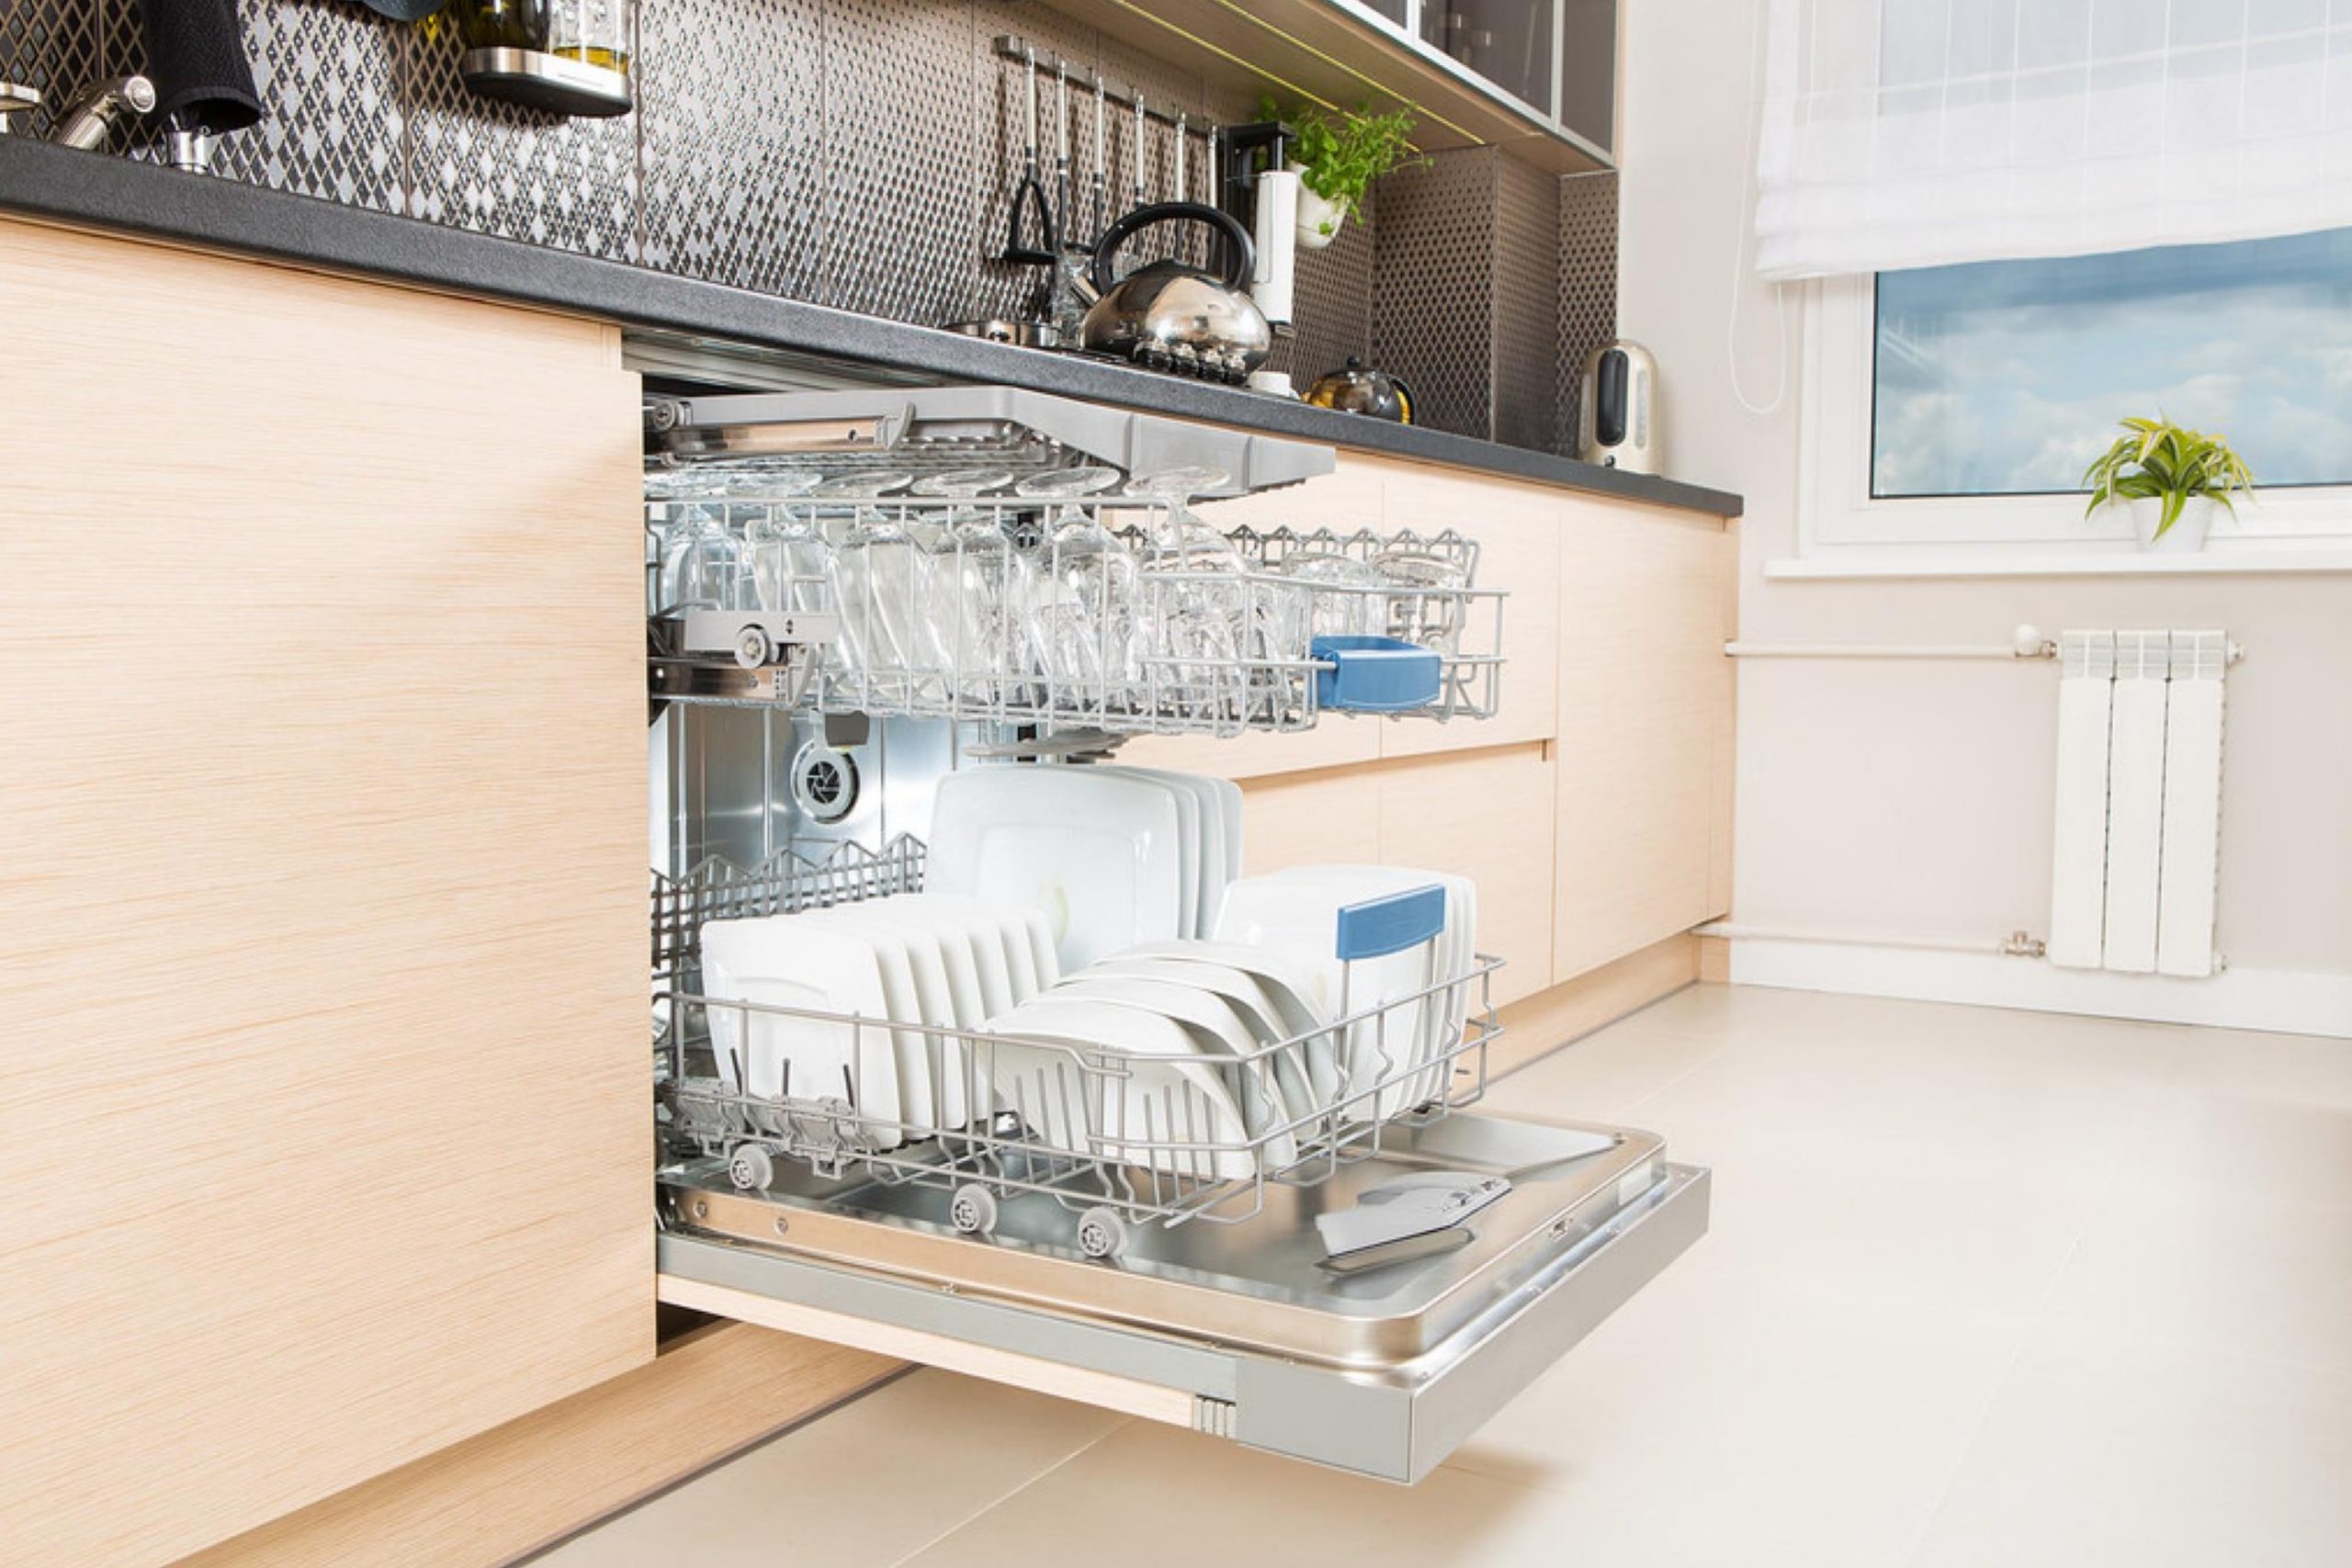 Use a Single Sink And a Compact Dishwasher